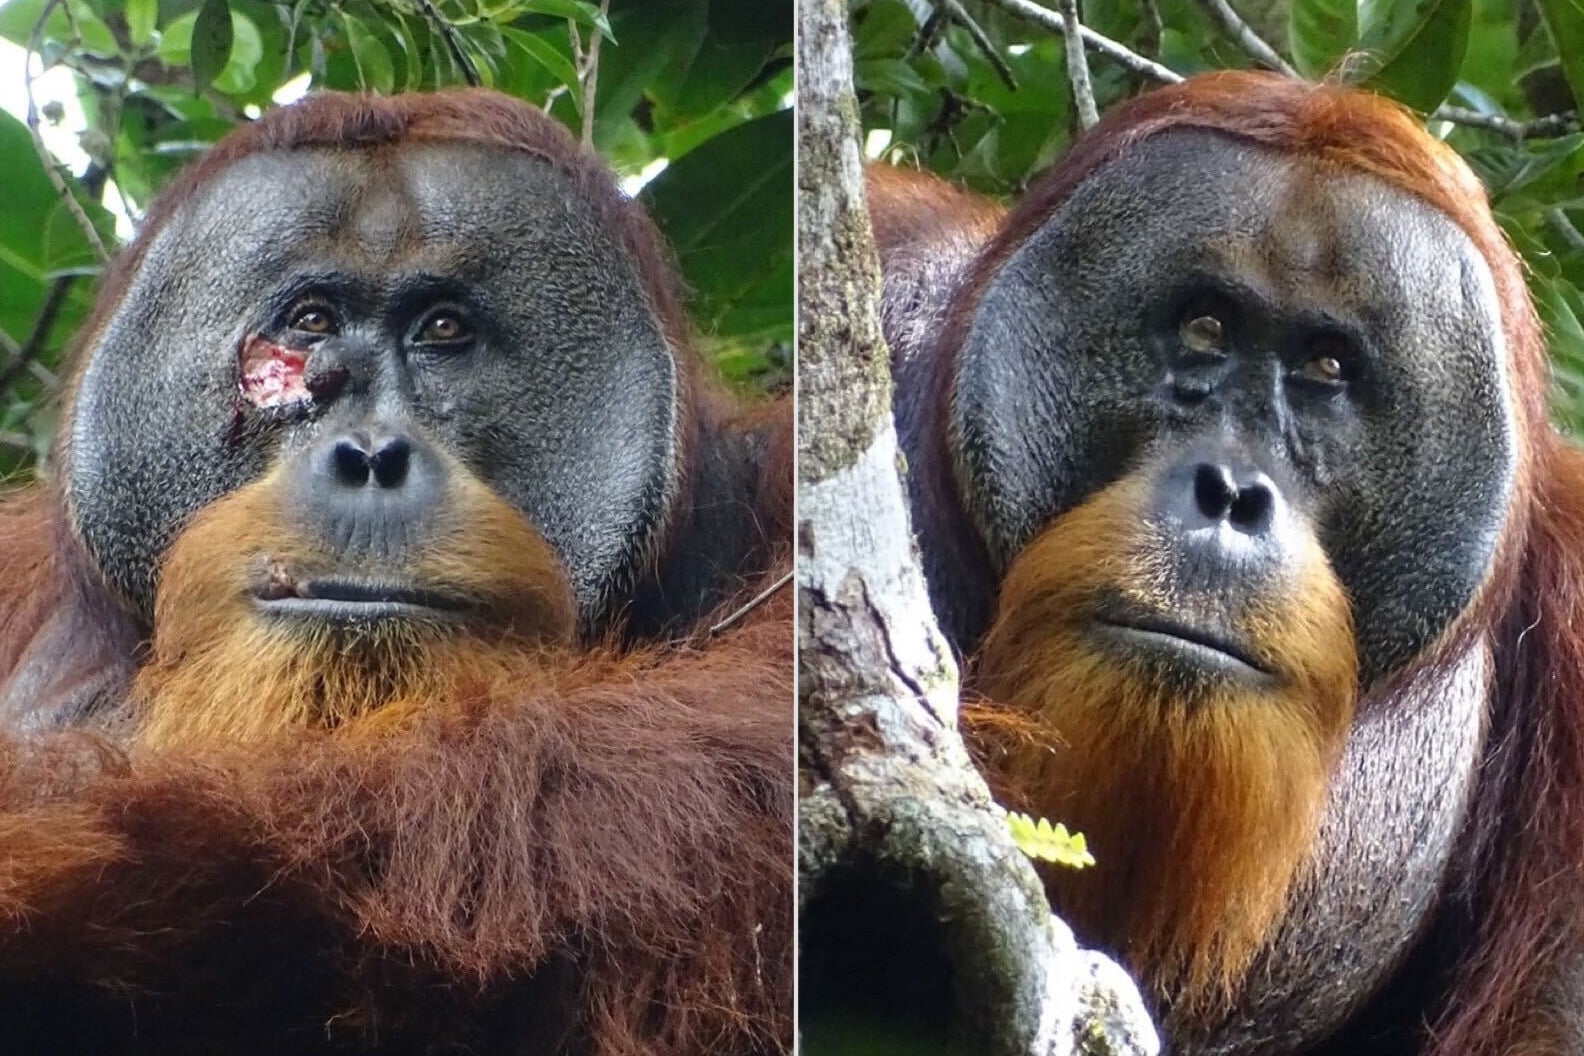 Before and after image of wounded orangutan